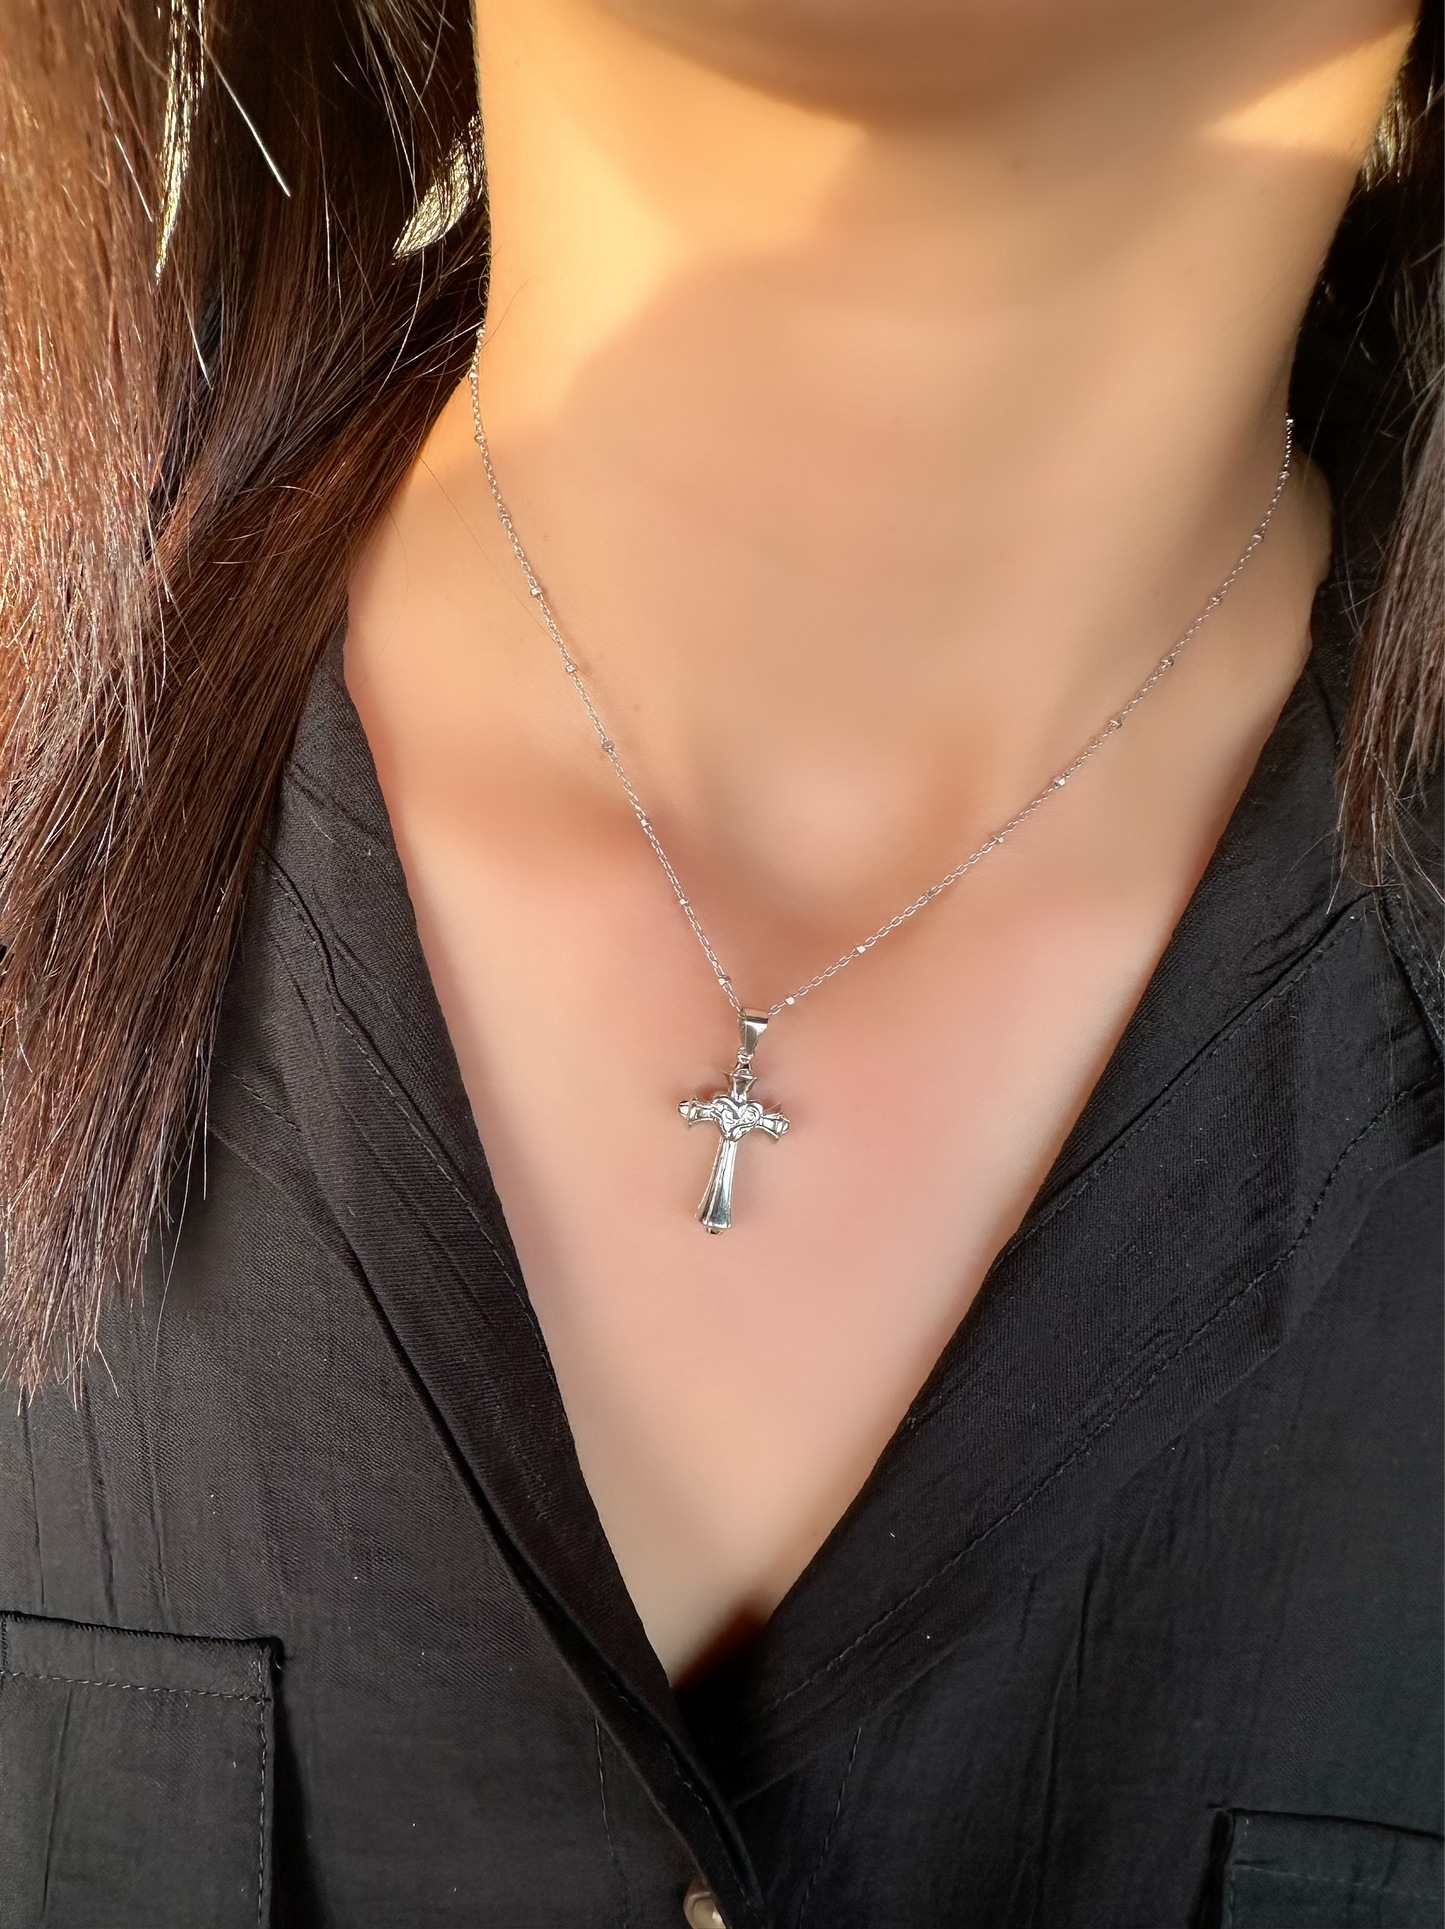 Plain Cross With Heart In The Middle Necklace